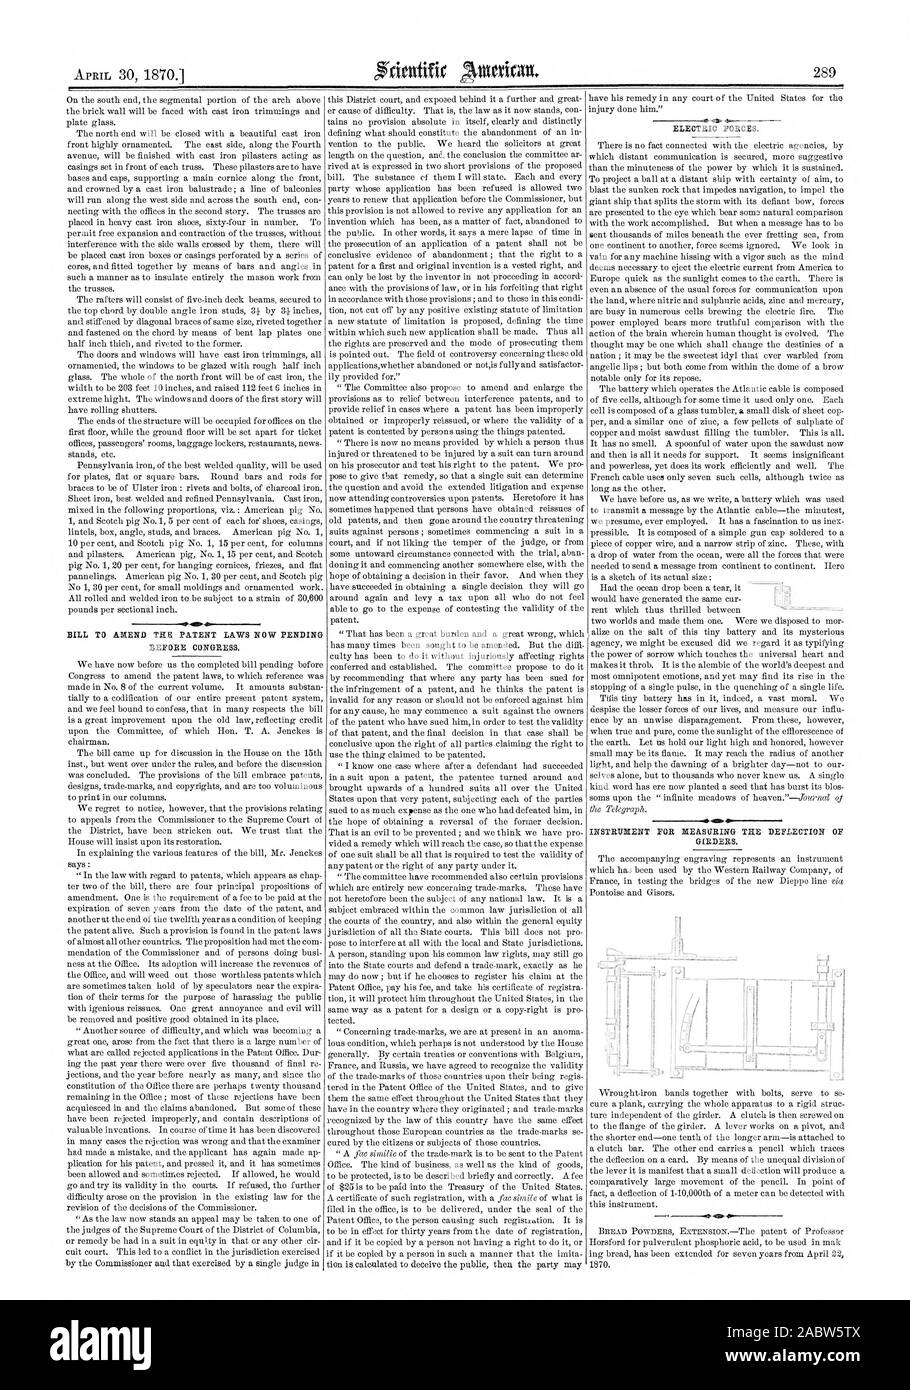 BILL TO AMEND THE PATENT LAWS NOW PENDING BEFORE CONGRESS. ELECTRIC FORCES. INSTRUMENT FOR MEASURING THE DEFLECTION OF GIRDERS, scientific american, 1870-04-30 Stock Photo